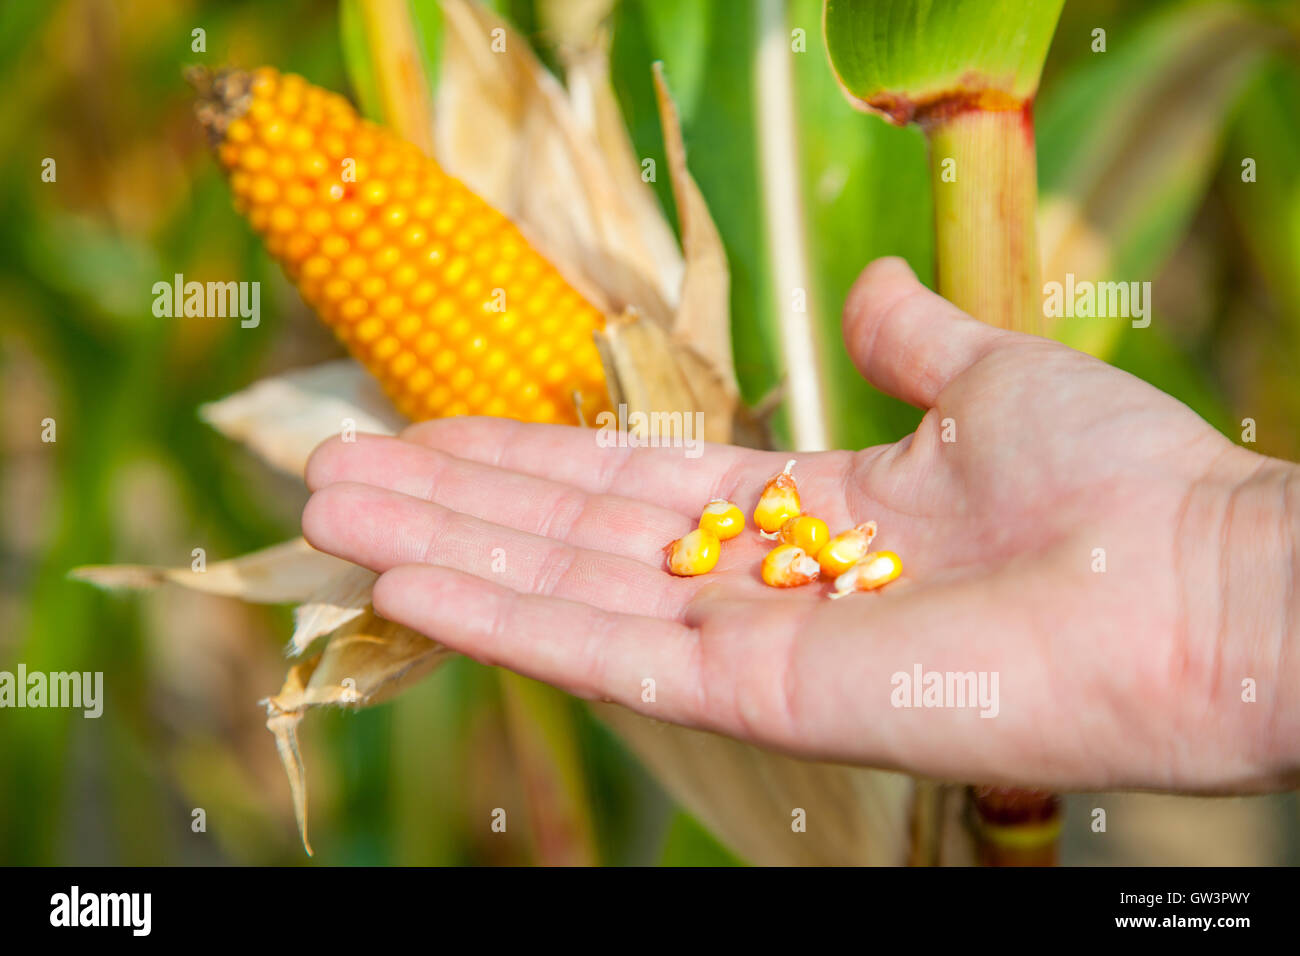 corn in a hand on a corn field Stock Photo